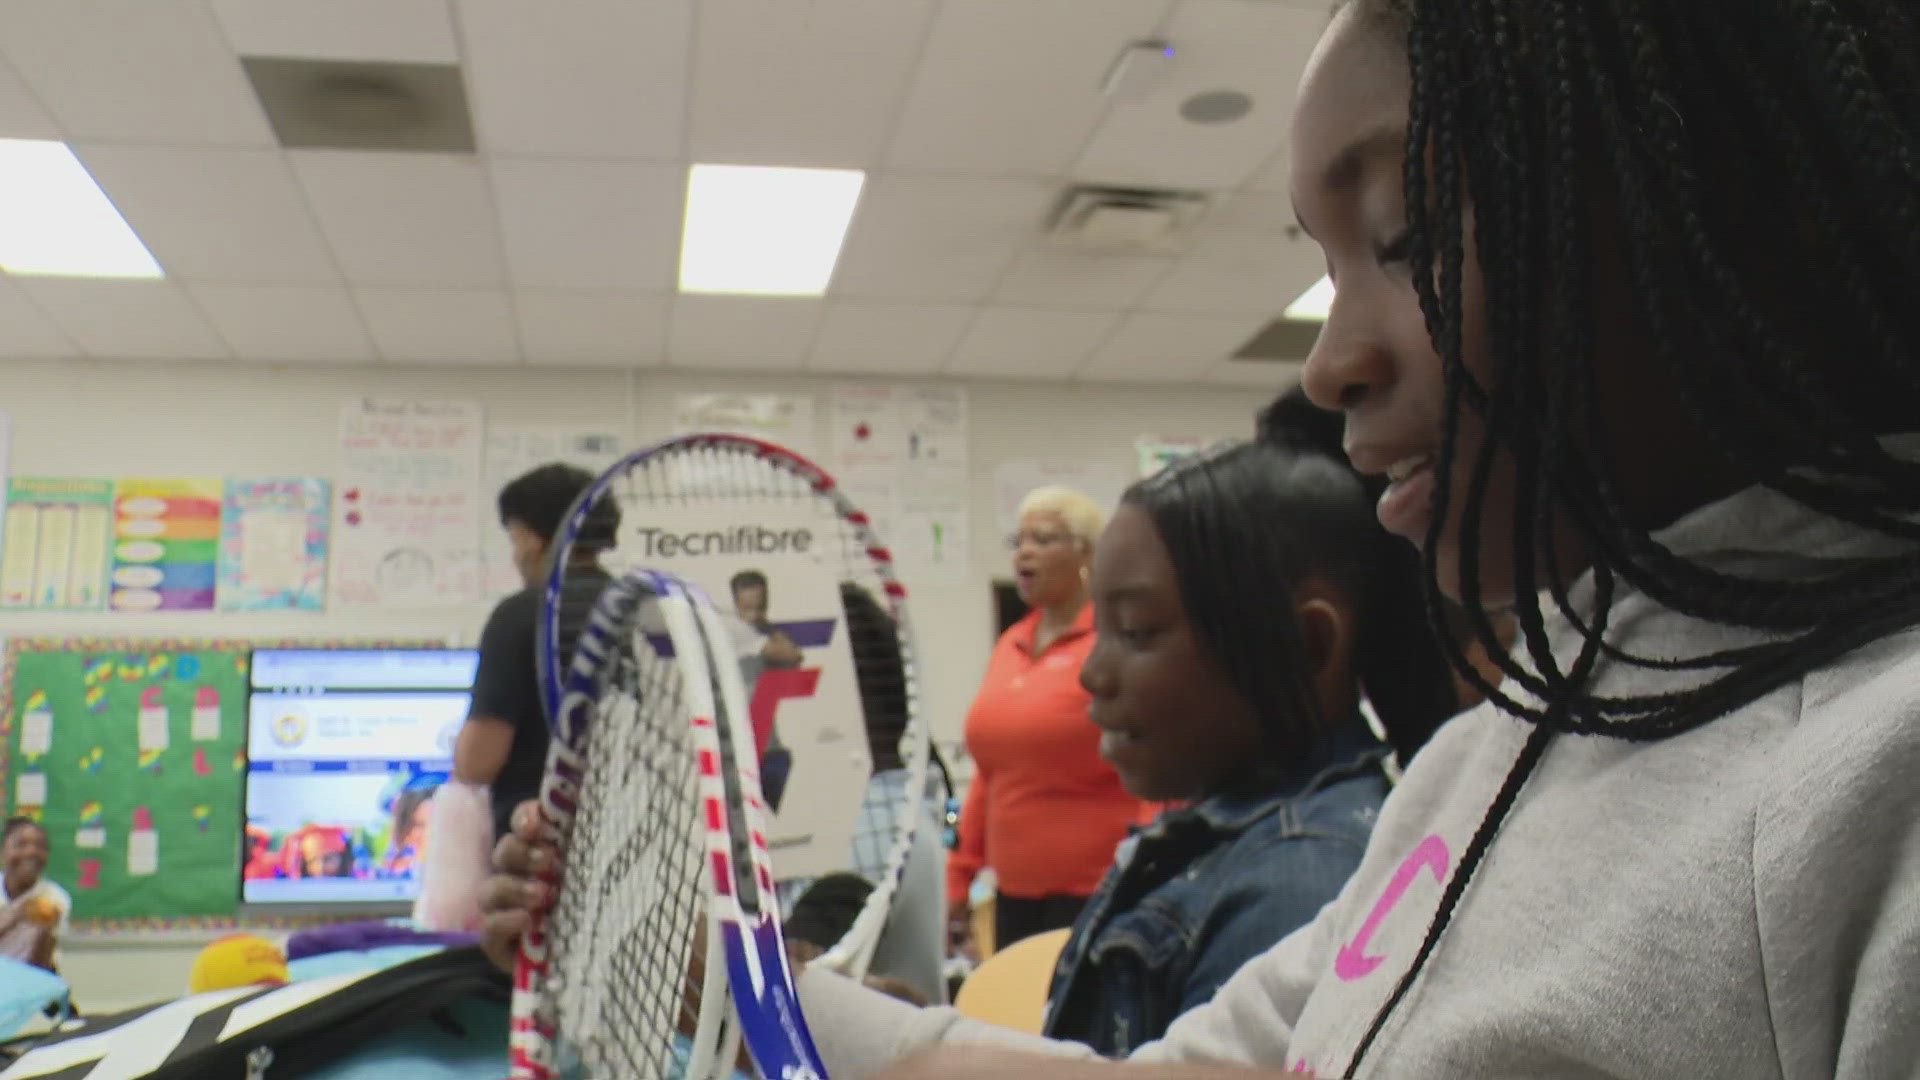 East St. Louis fourth graders received a gift bag containing a tennis racket and tennis ball. It's part of an effort to make the game more inclusive.